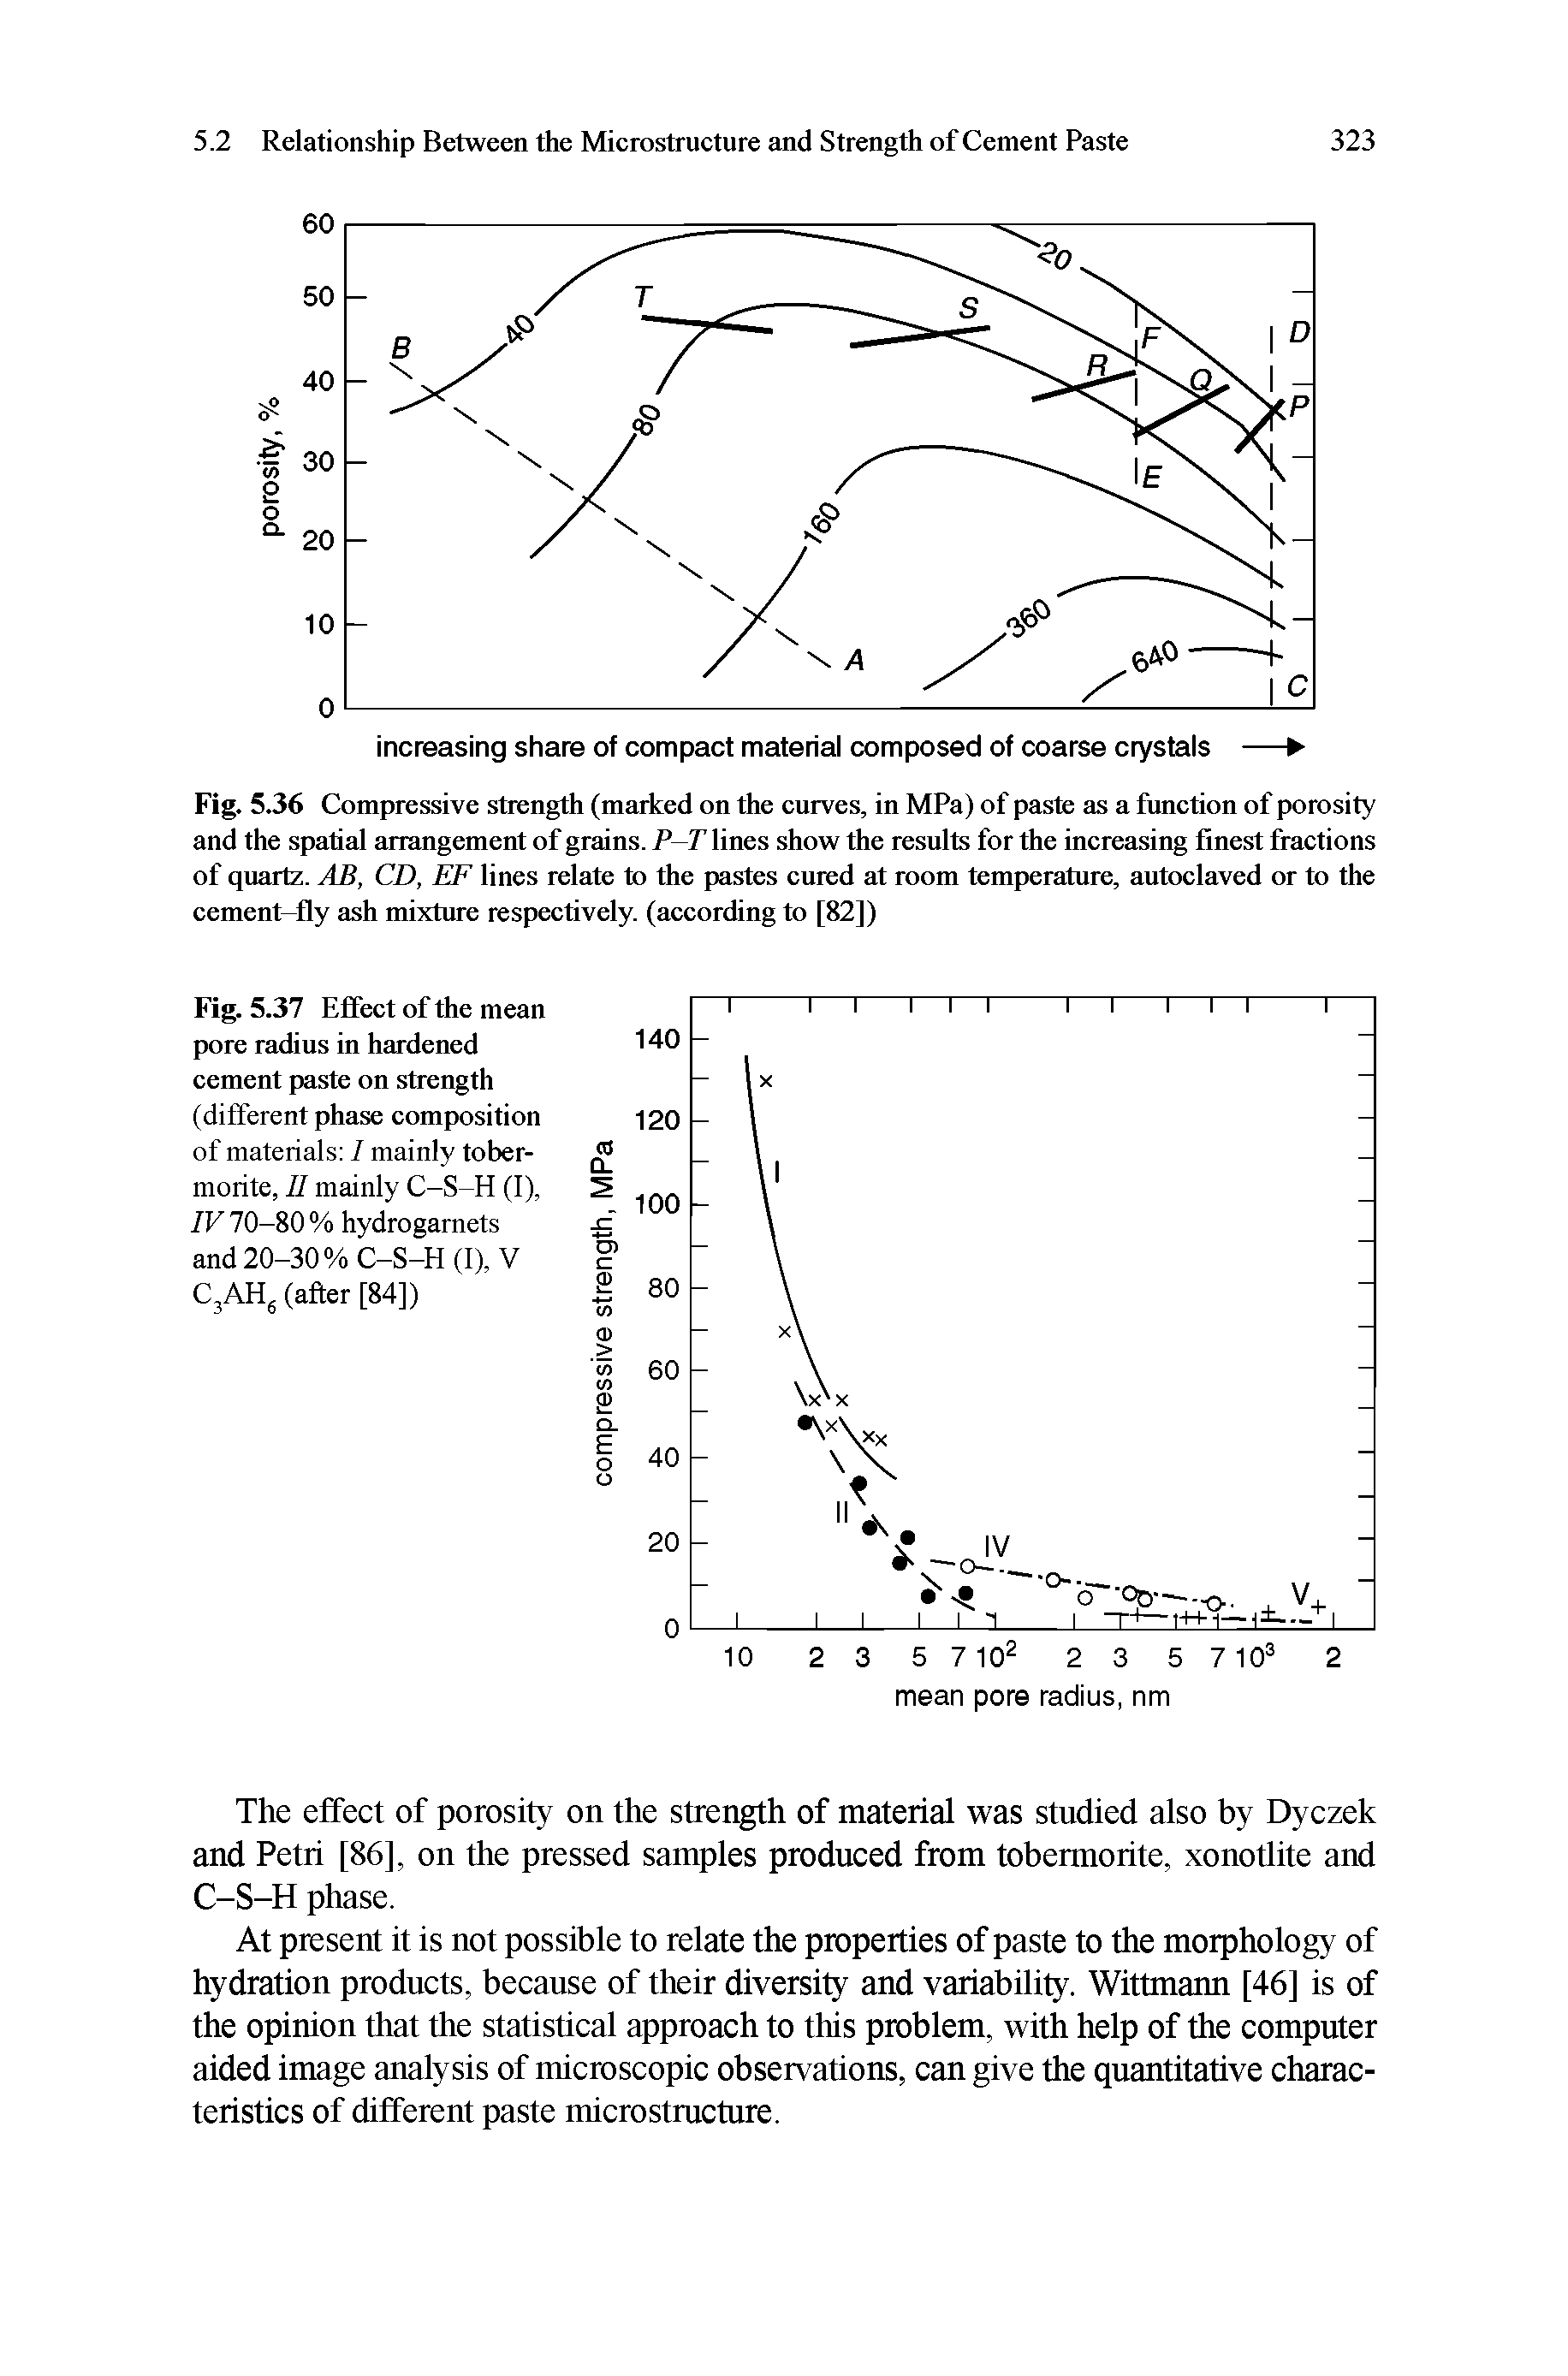 Fig. 5. 36 Compressive strength (marked on the curves, in MPa) of paste as a function of porosity and the spatial arrangement of grains. P—T lines show the results for the increasing finest fractions of quartz. AB, CD, EF lines relate to the pastes cured at room temperature, autoclaved or to the eement-fly ash mixture respectively, (according to [82])...